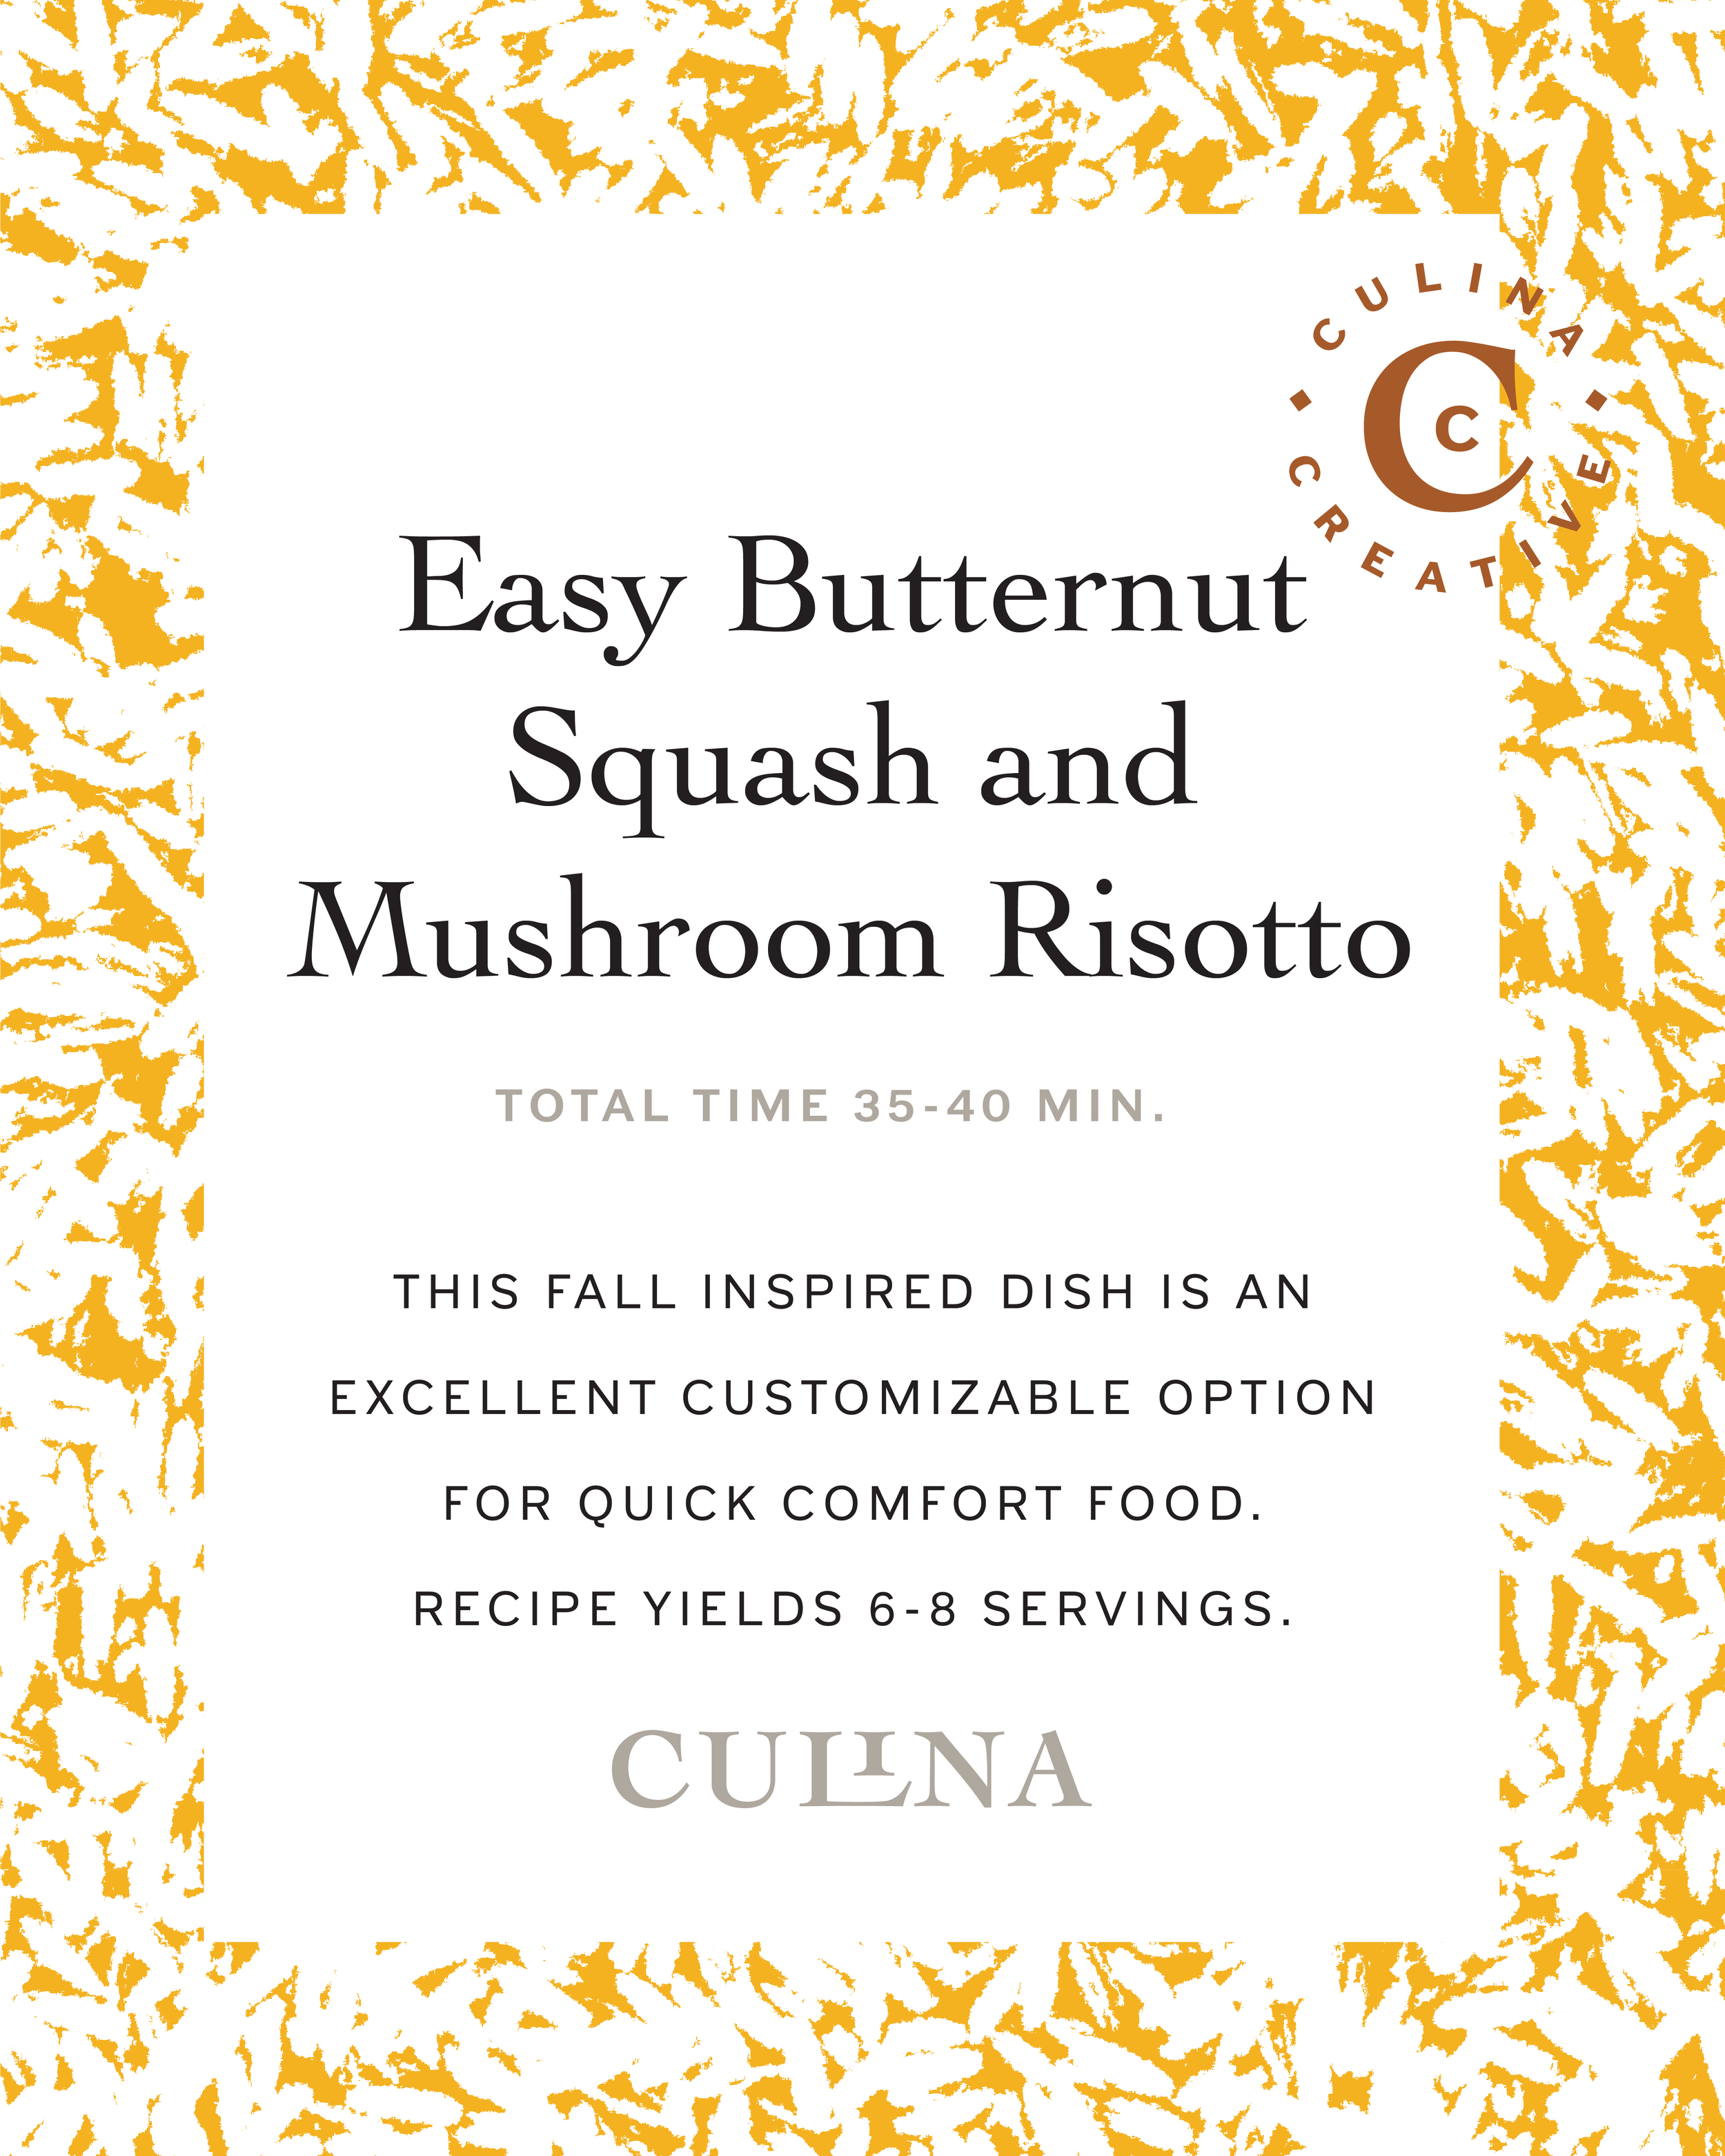 Easy Butternut Squash and Mushroom Risotto